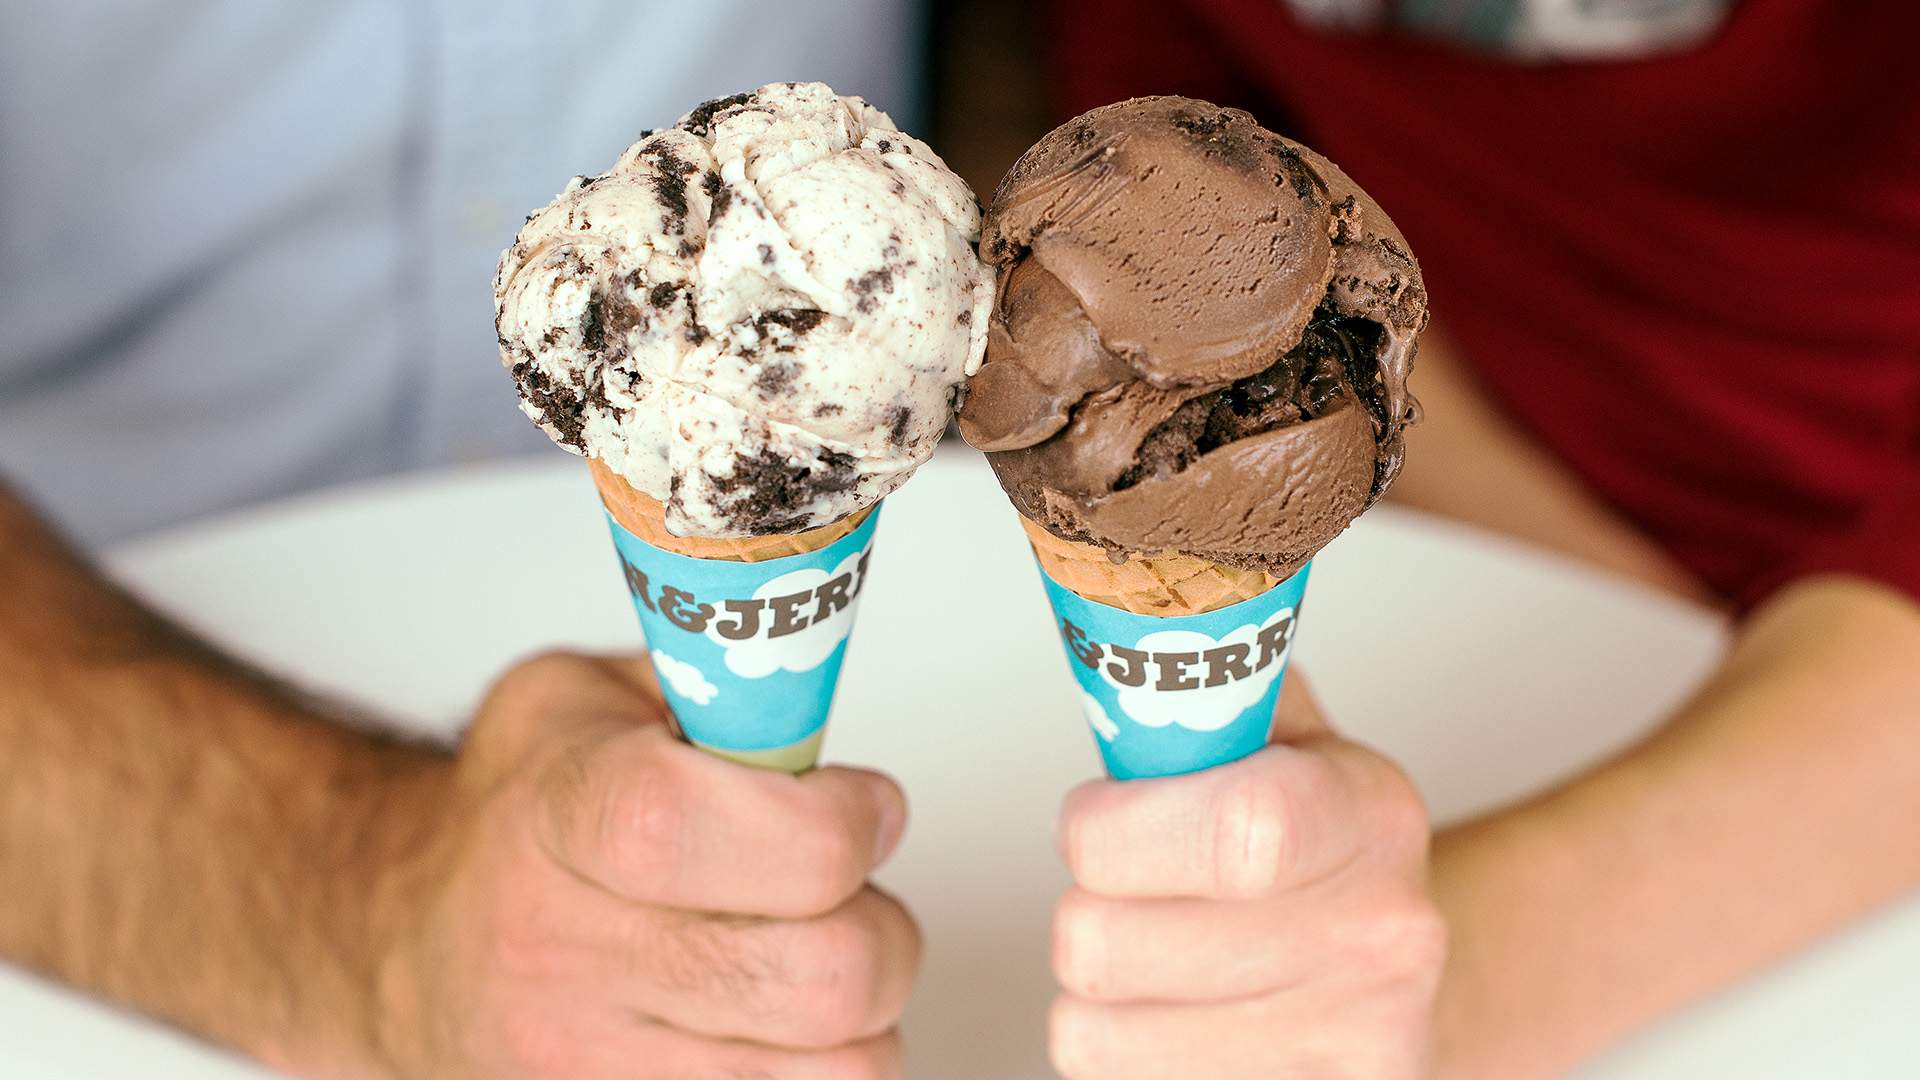 Ben & Jerry's and Uber Eats are Delivering Free Ice Creams to Celebrate the Start of Summer